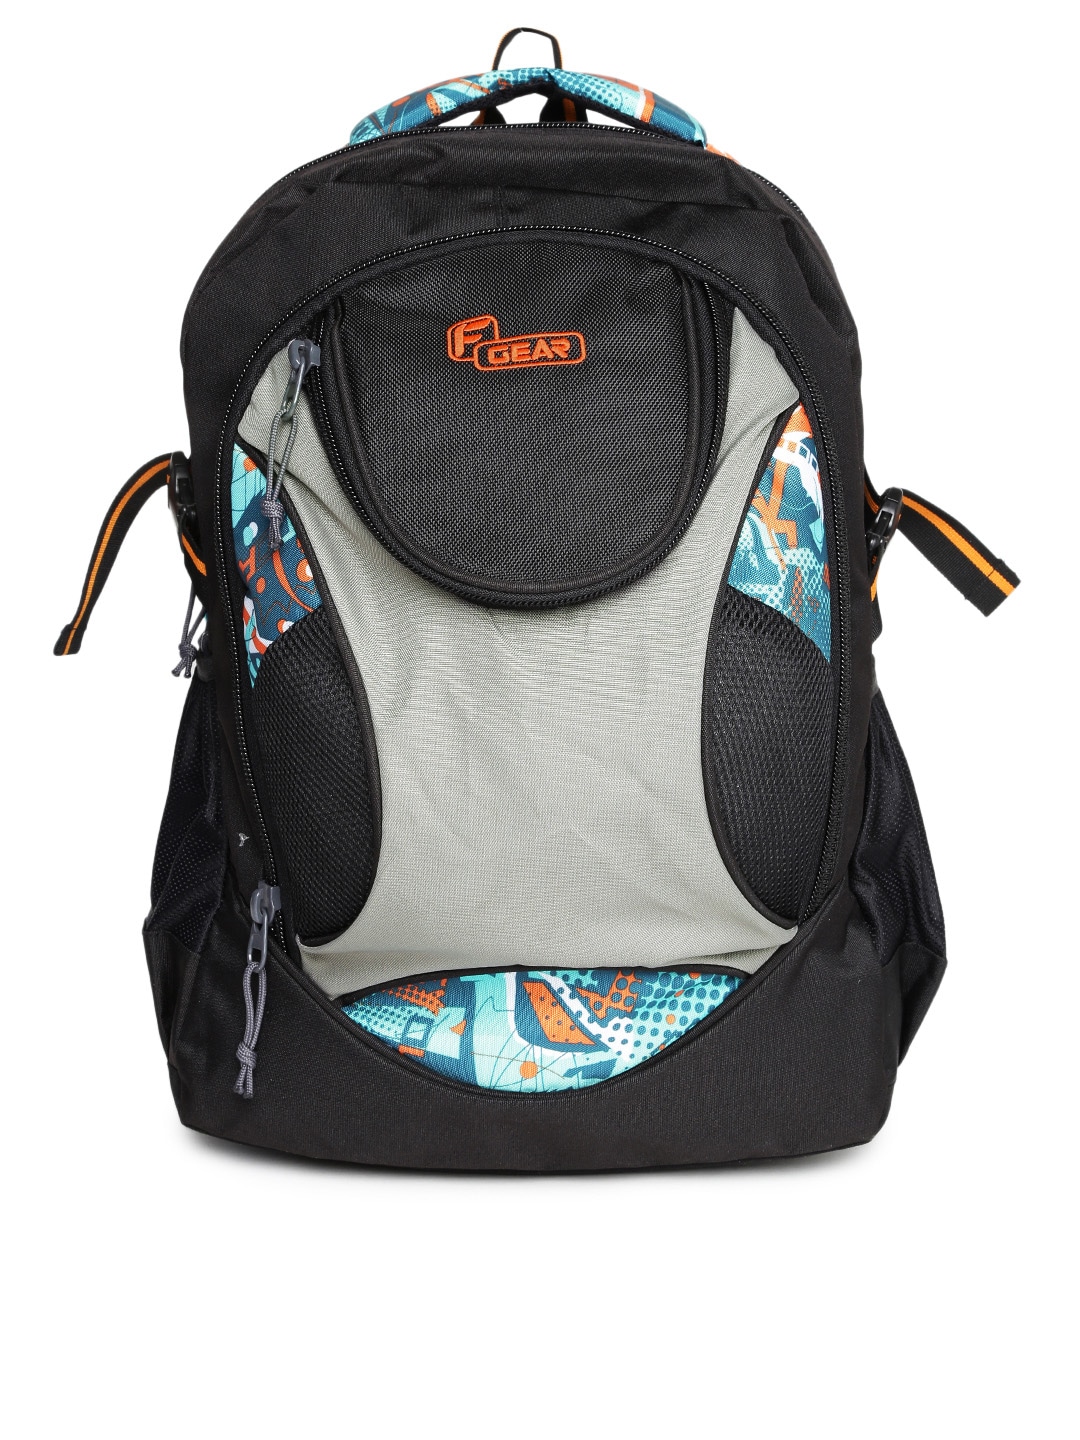 F Gear Unisex Black Sniper Light P3 Backpack Price in India